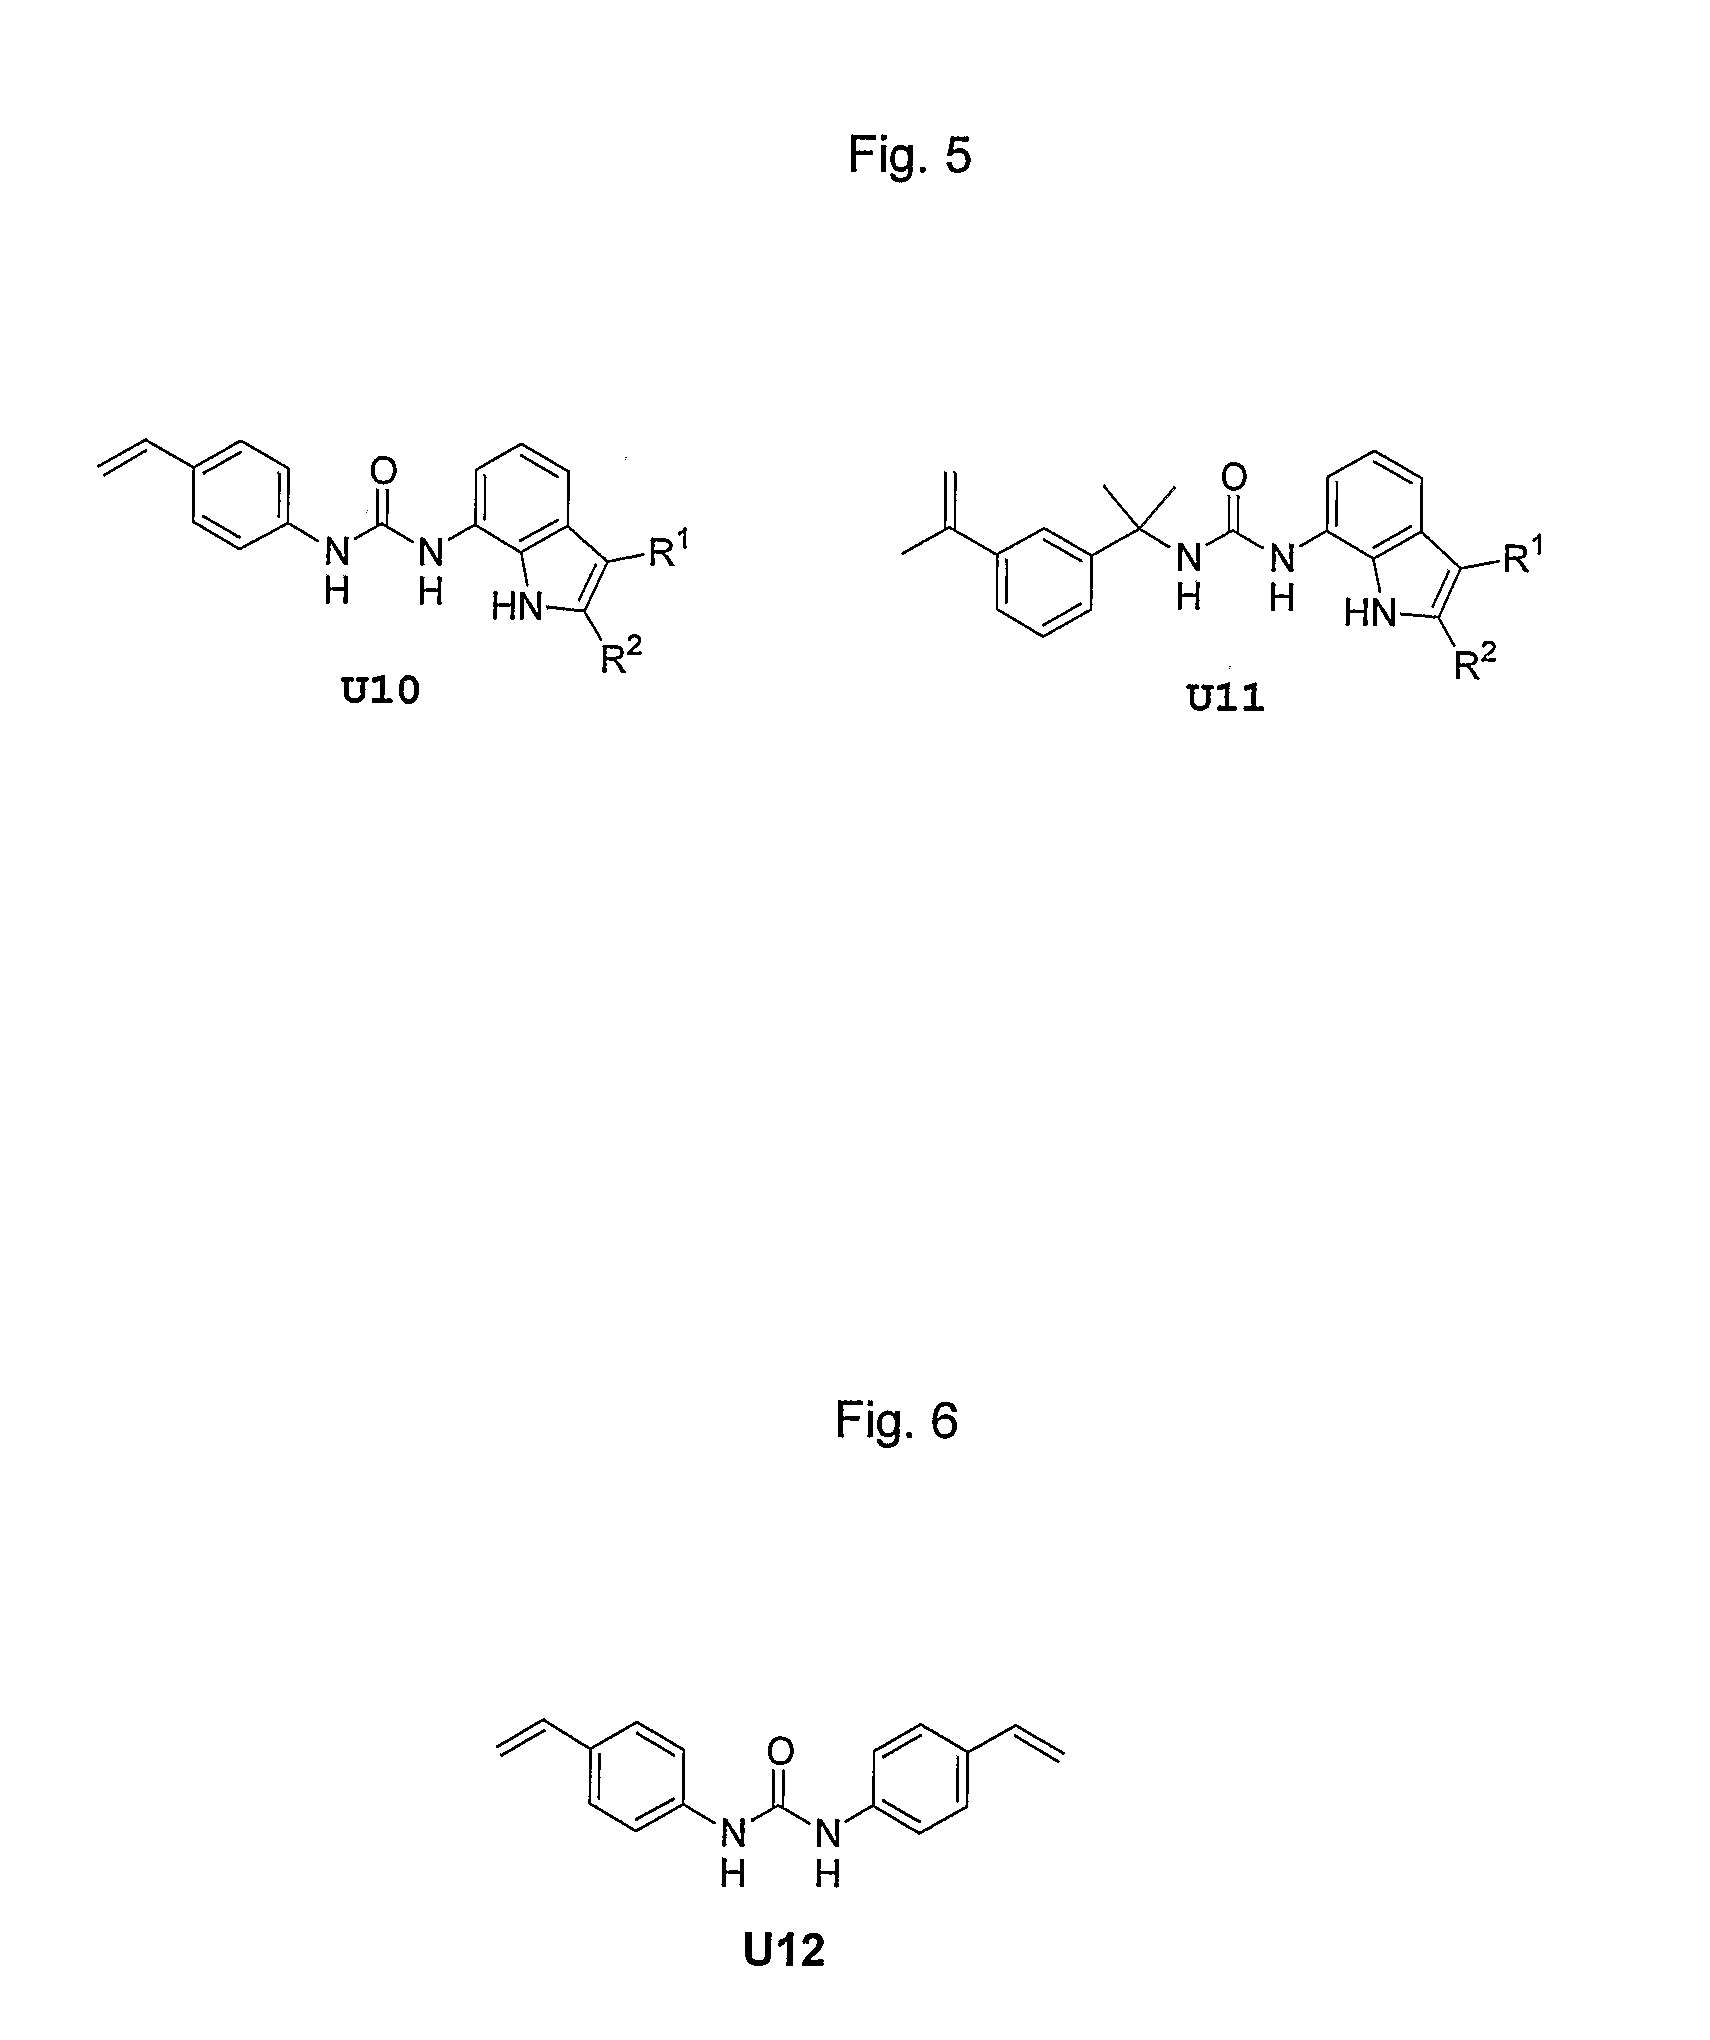 Method for Producing Molecularly Imprinted Polymers for the Recognition of Target Molecules